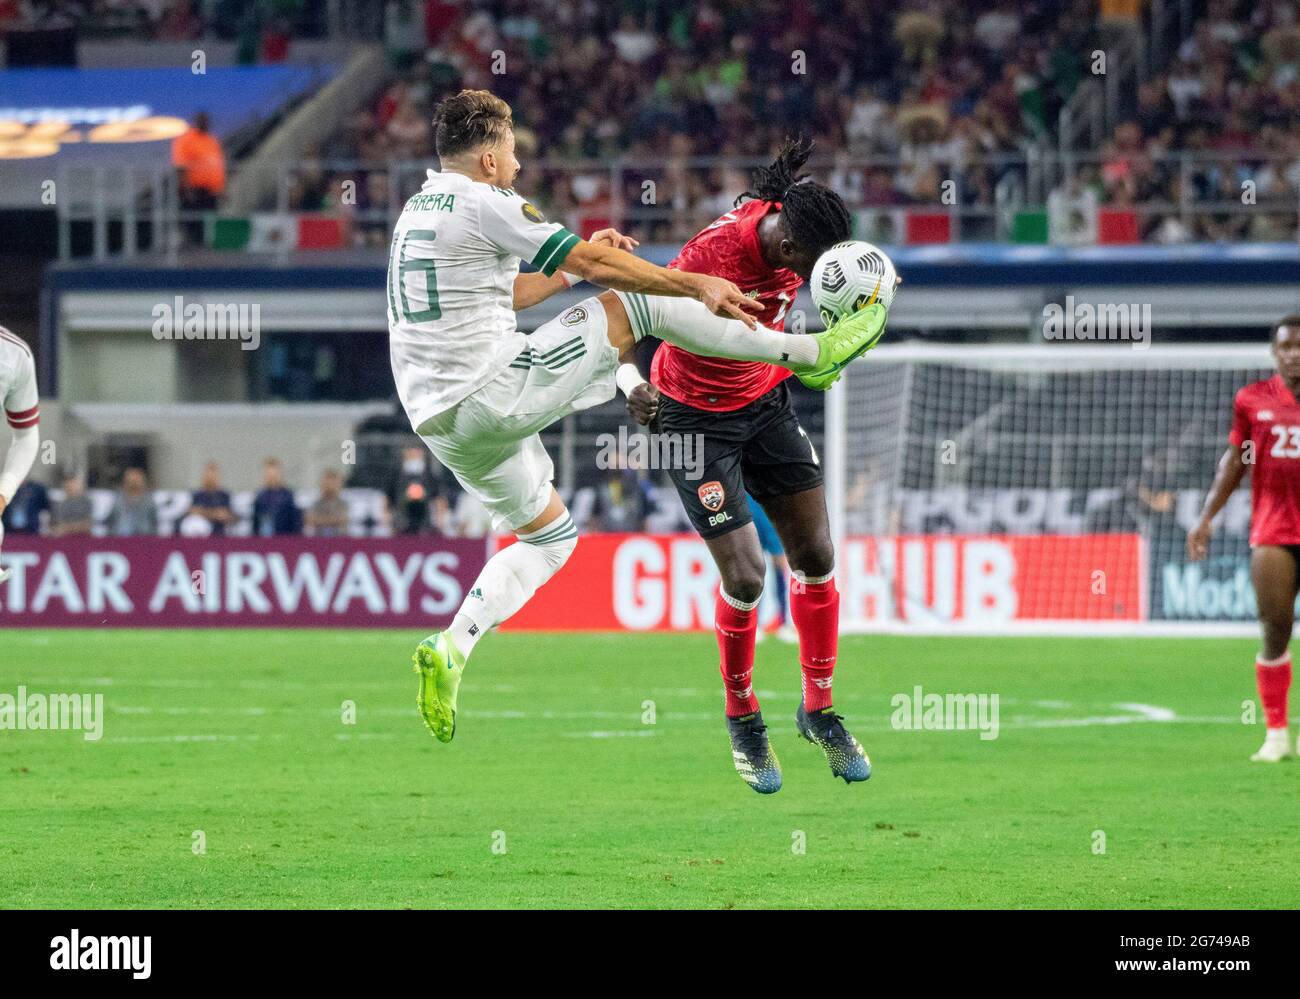 Jul 10, 2021: Mexico midfielder Hector Herrera (16) battles for the ball in the first half during a CONCACAF Gold Cup game between Mexico and Trinidad & Tobago at AT&T Stadium in Arlington, TX Mexico and Trinidad & Tobago tied 0-0 Albert Pena/CSM Stock Photo